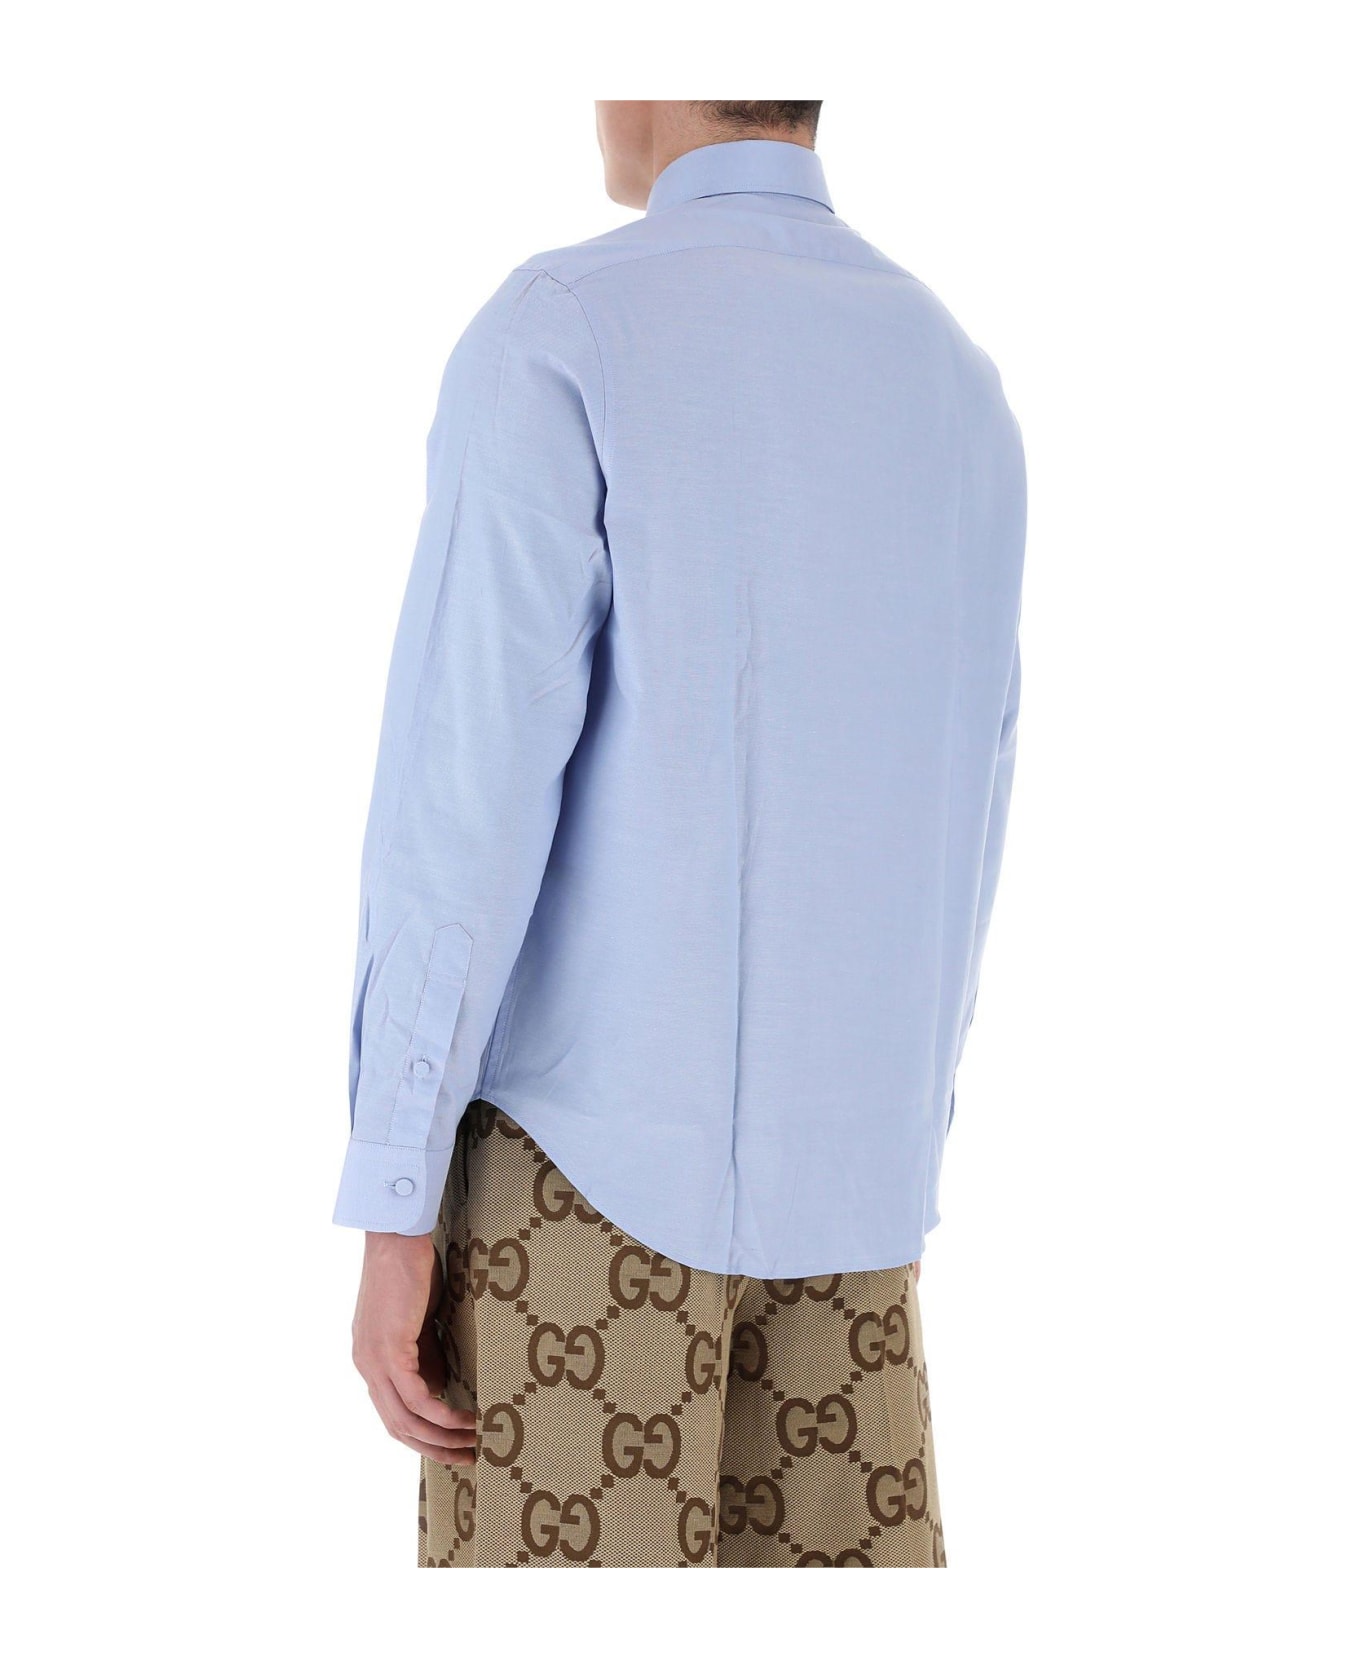 Gucci Shirt With Pocket - Blue シャツ